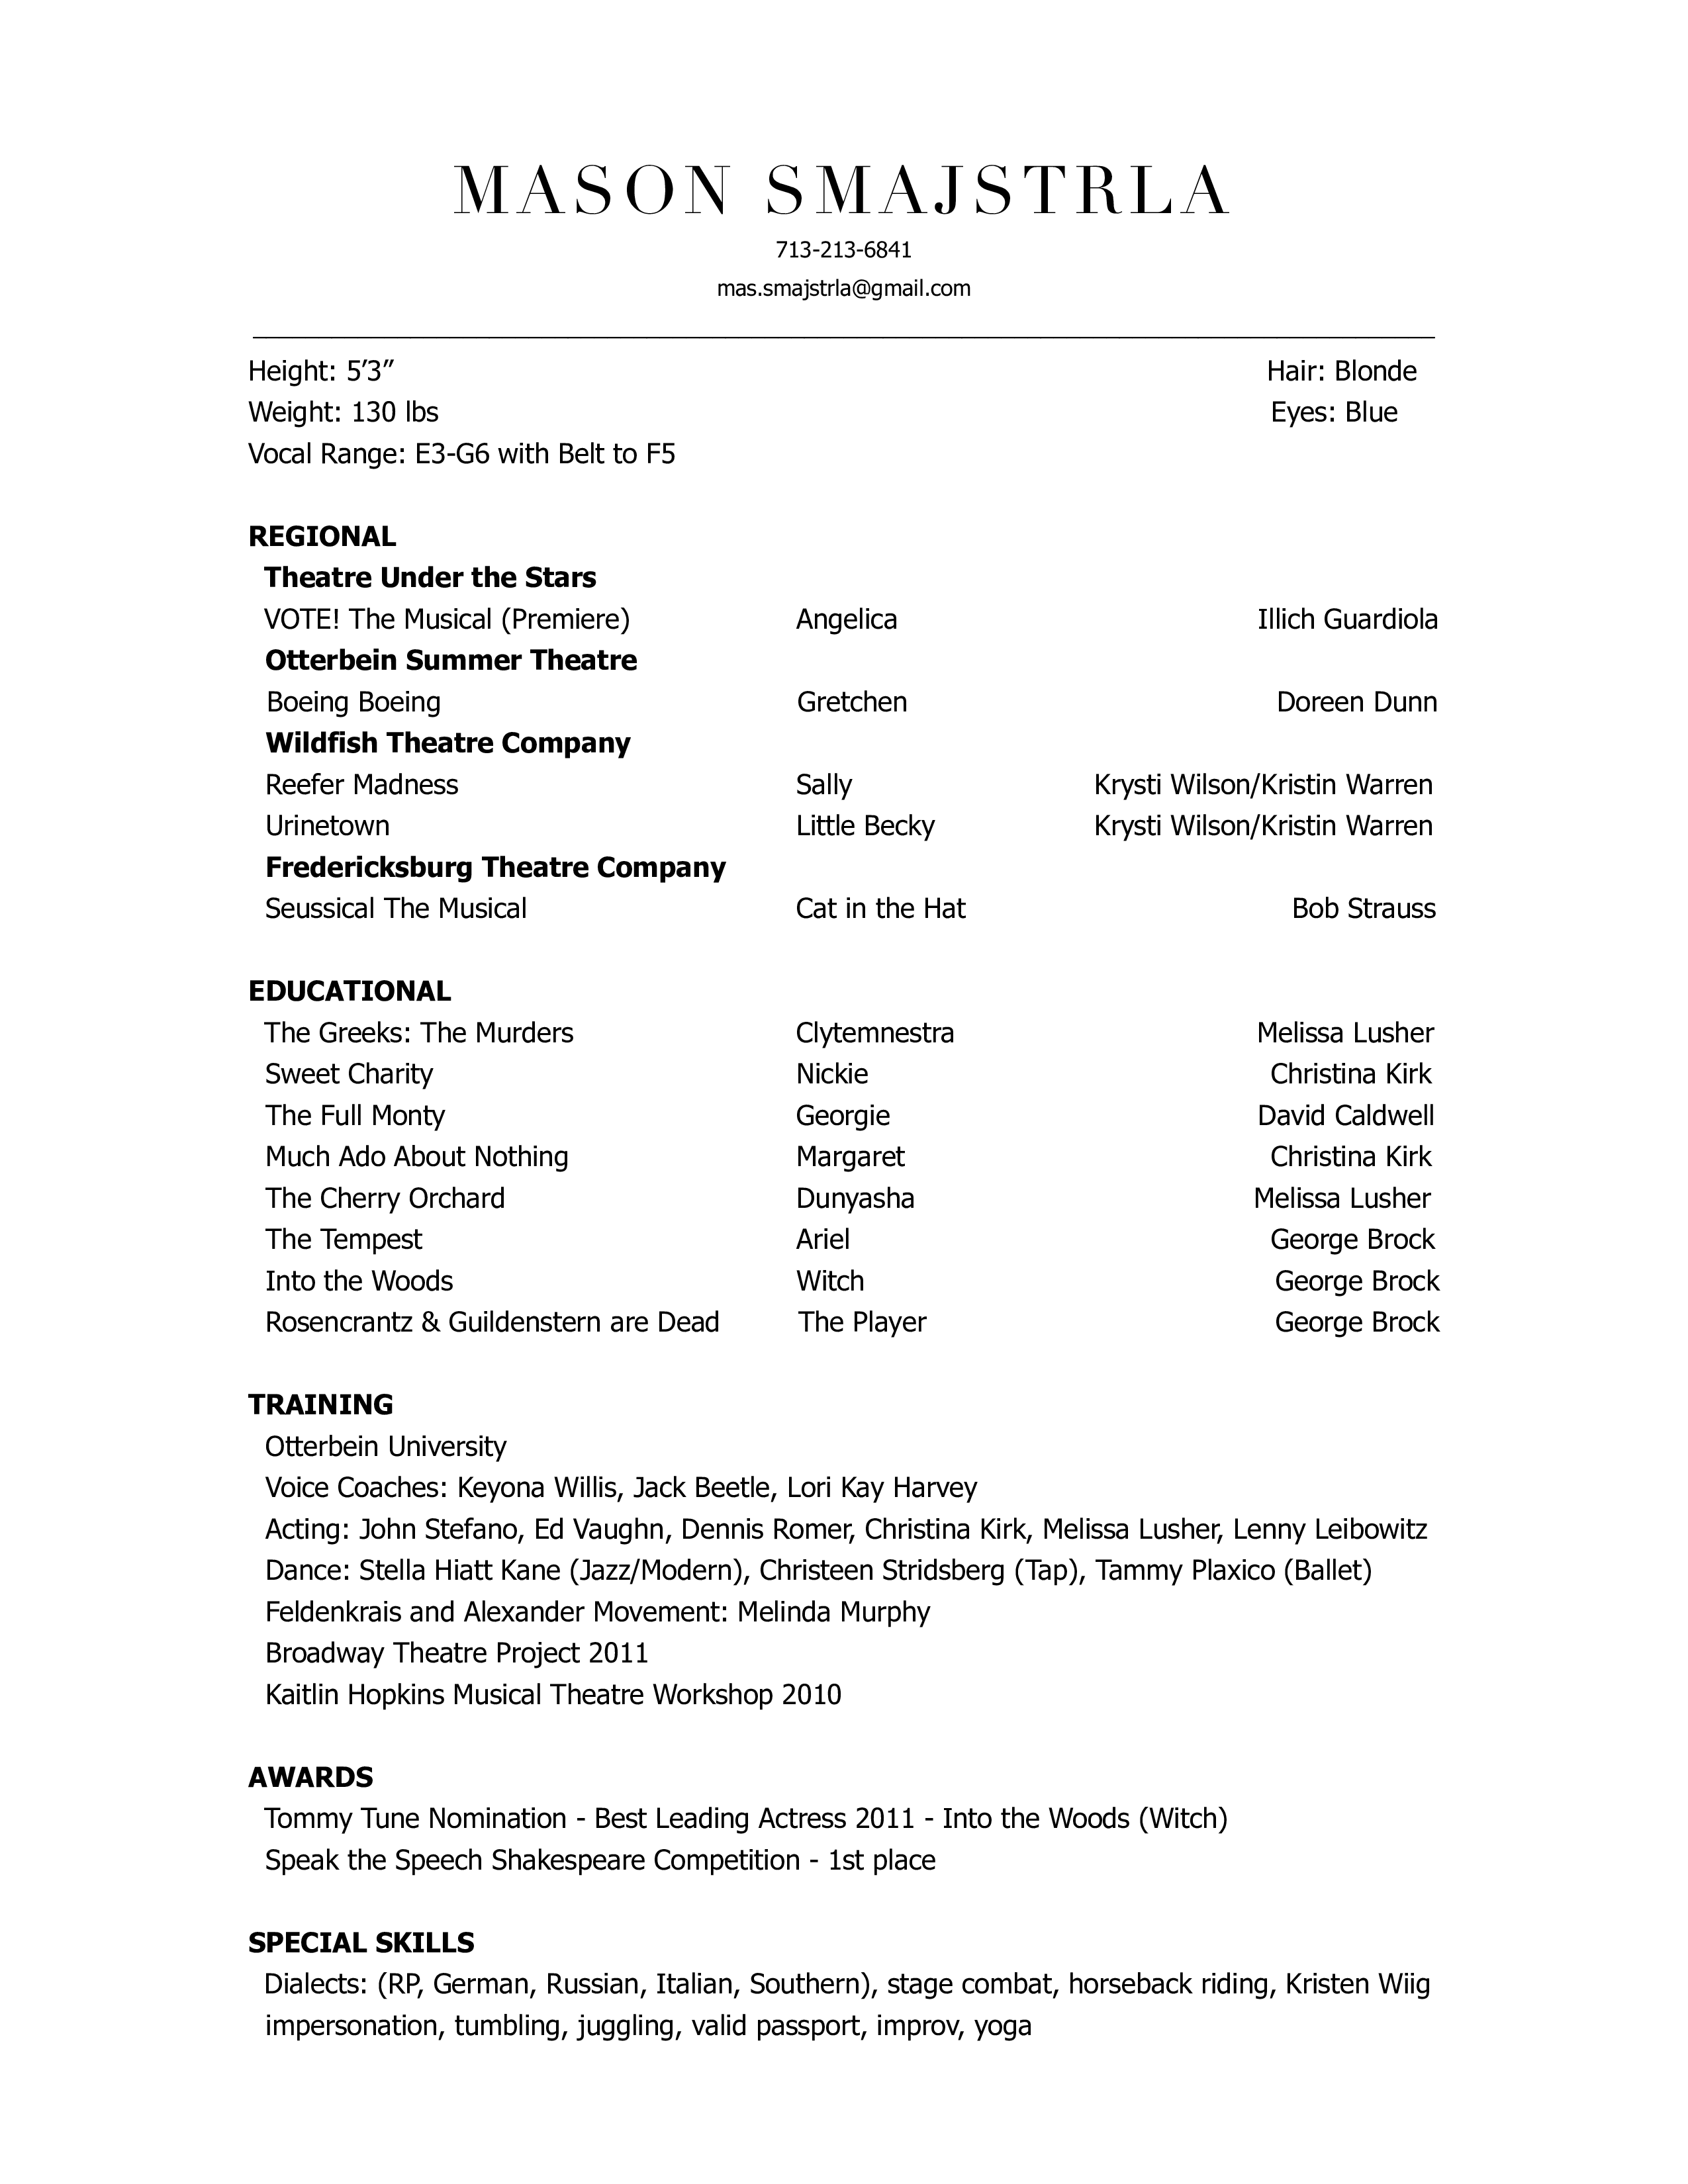 Professional Theatre Resume  Templates at allbusinesstemplates With Regard To Theatrical Resume Template Word